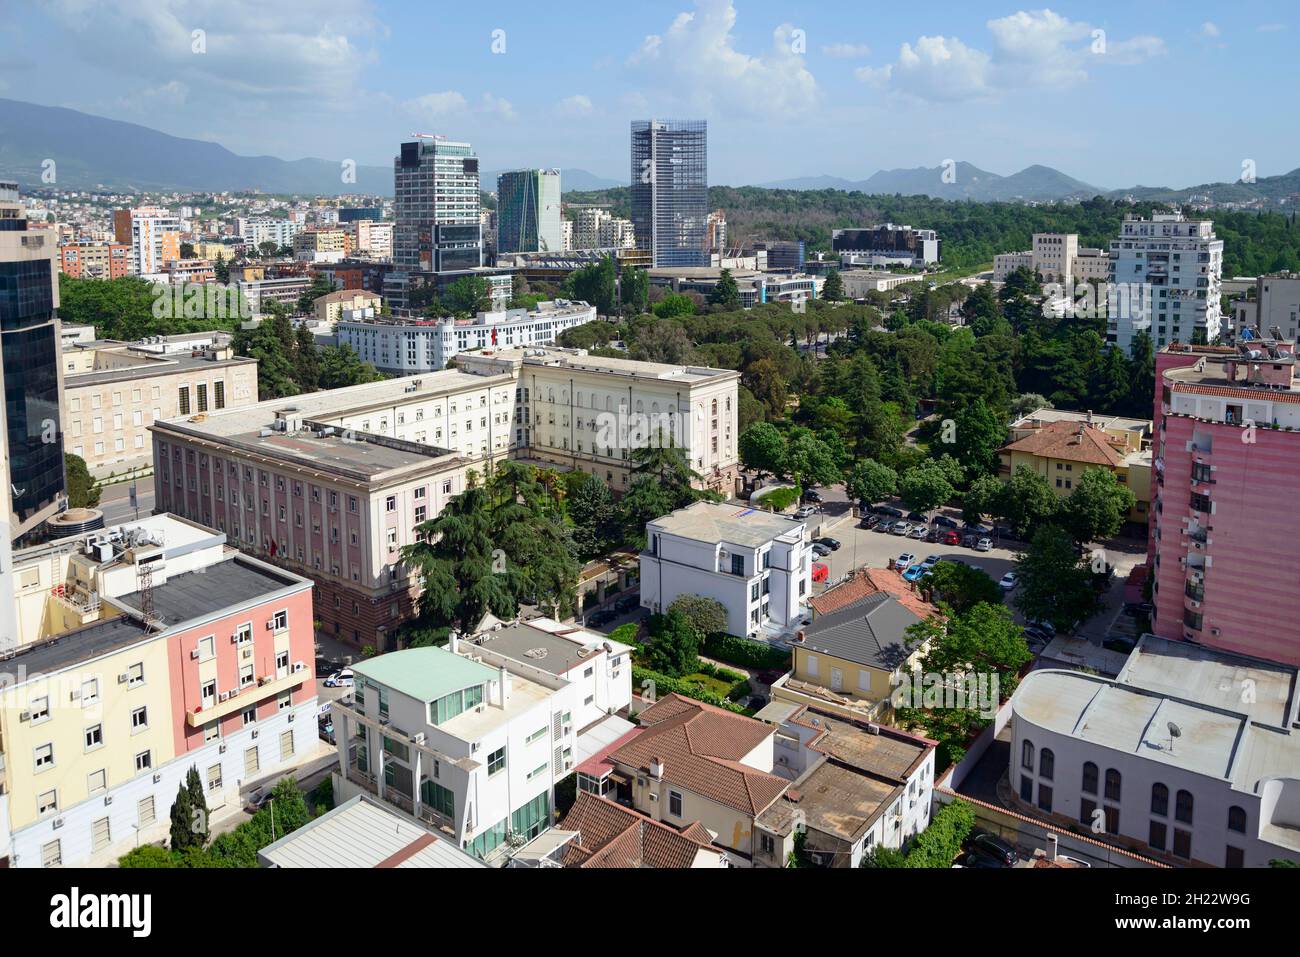 City centre, view from Sky Tower, mountains in the back, Tirana, Albania Stock Photo